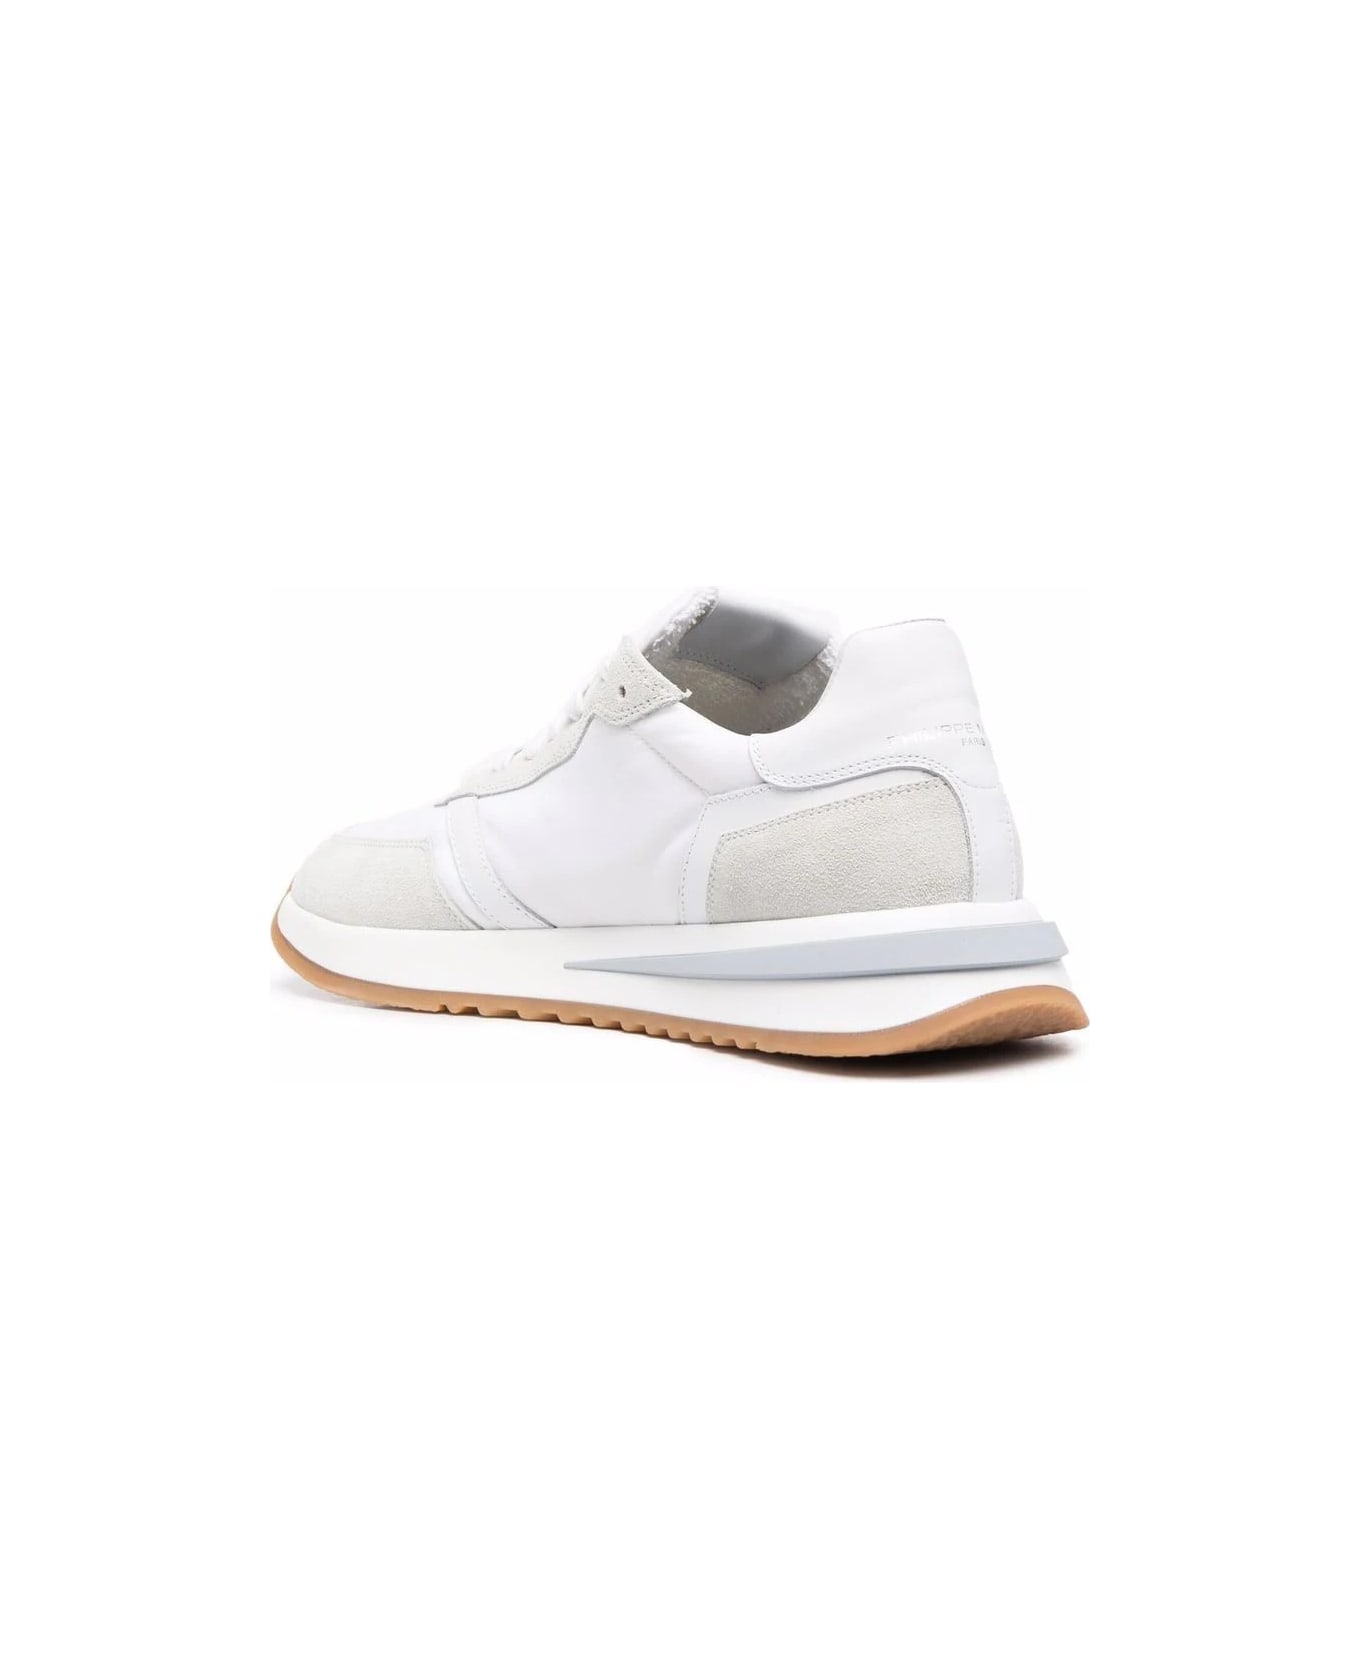 Philippe Model Tropez 2.1 Low Sneakers - White - White スニーカー